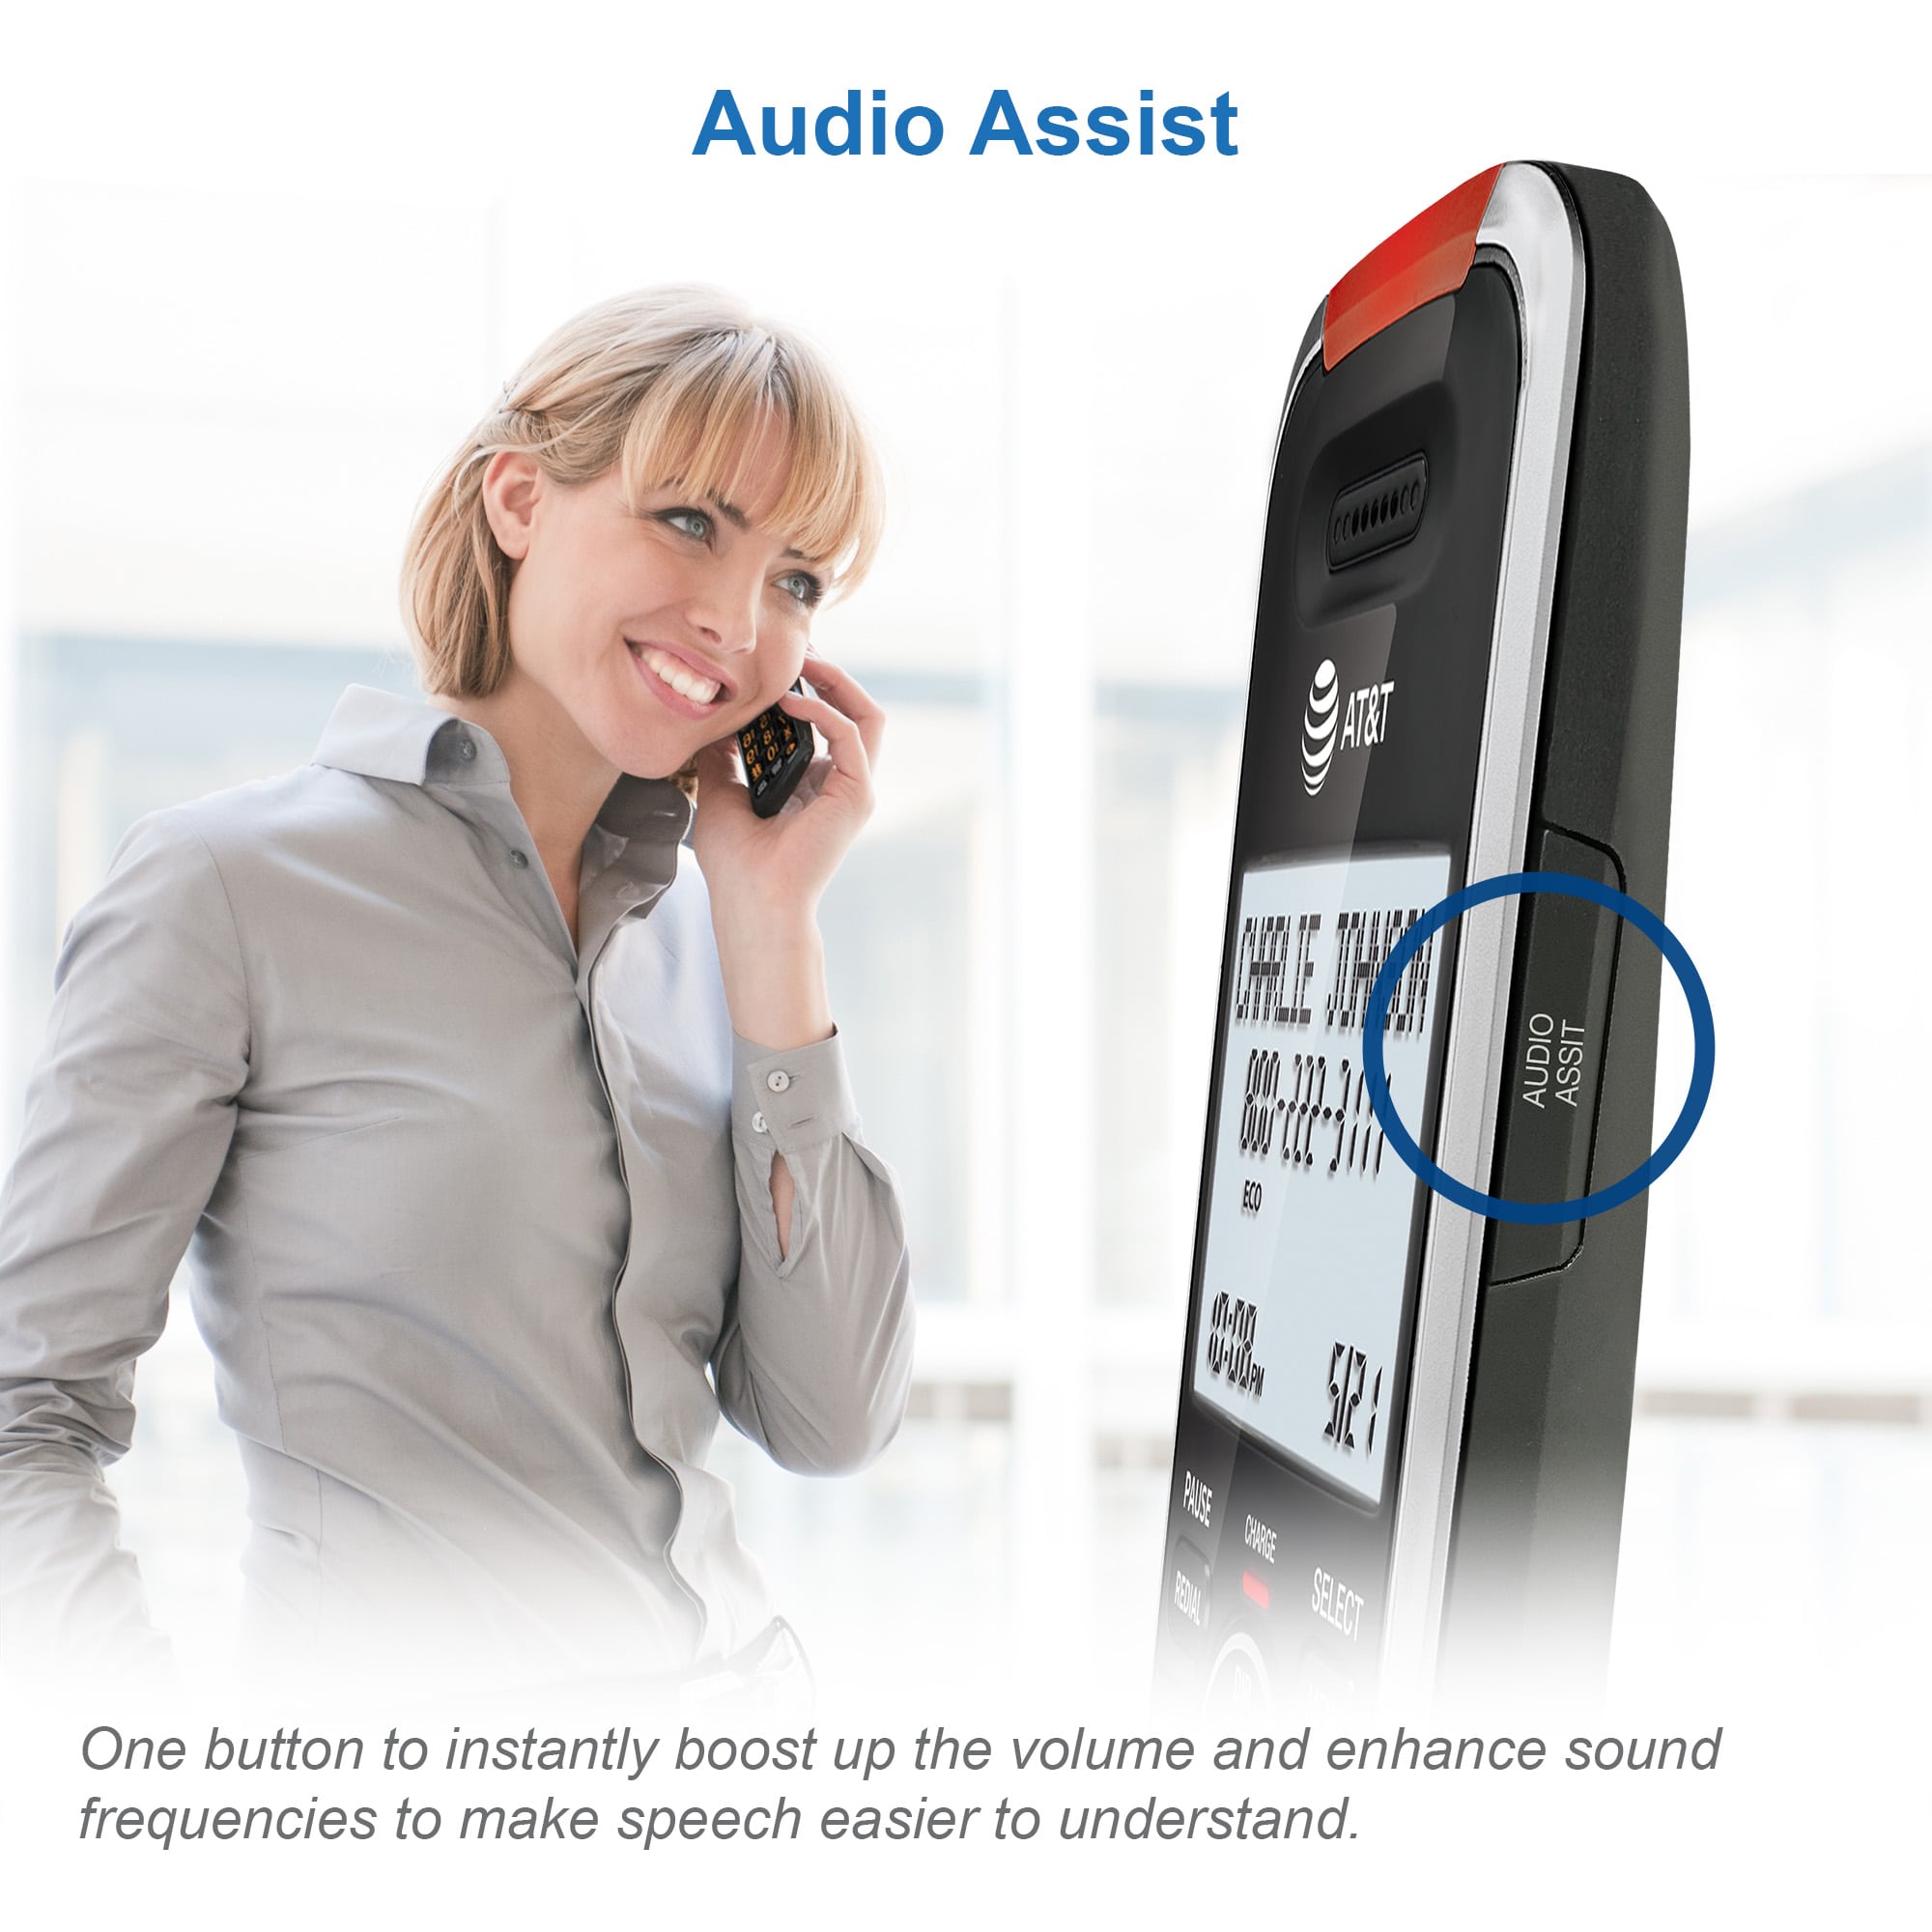 4-Handset Cordless Phone with Unsurpassed Range, Smart Call Blocker and Answering System - view 6